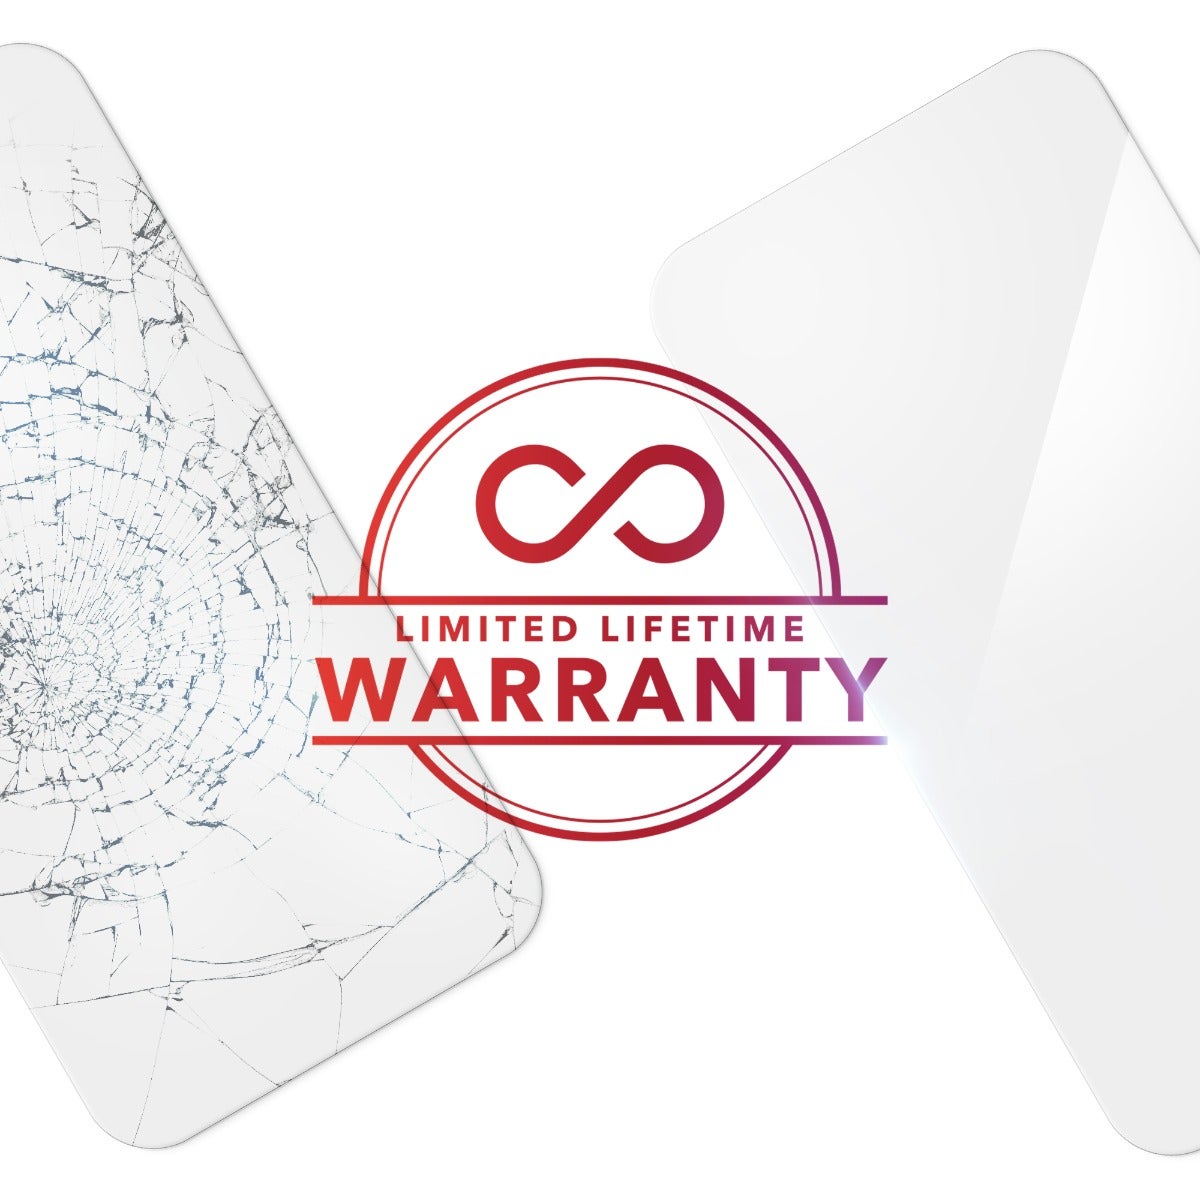 Limited Lifetime Warranty || If your Ultra Eco screen protector ever gets worn or damaged, we will replace it for as long as you own your device.